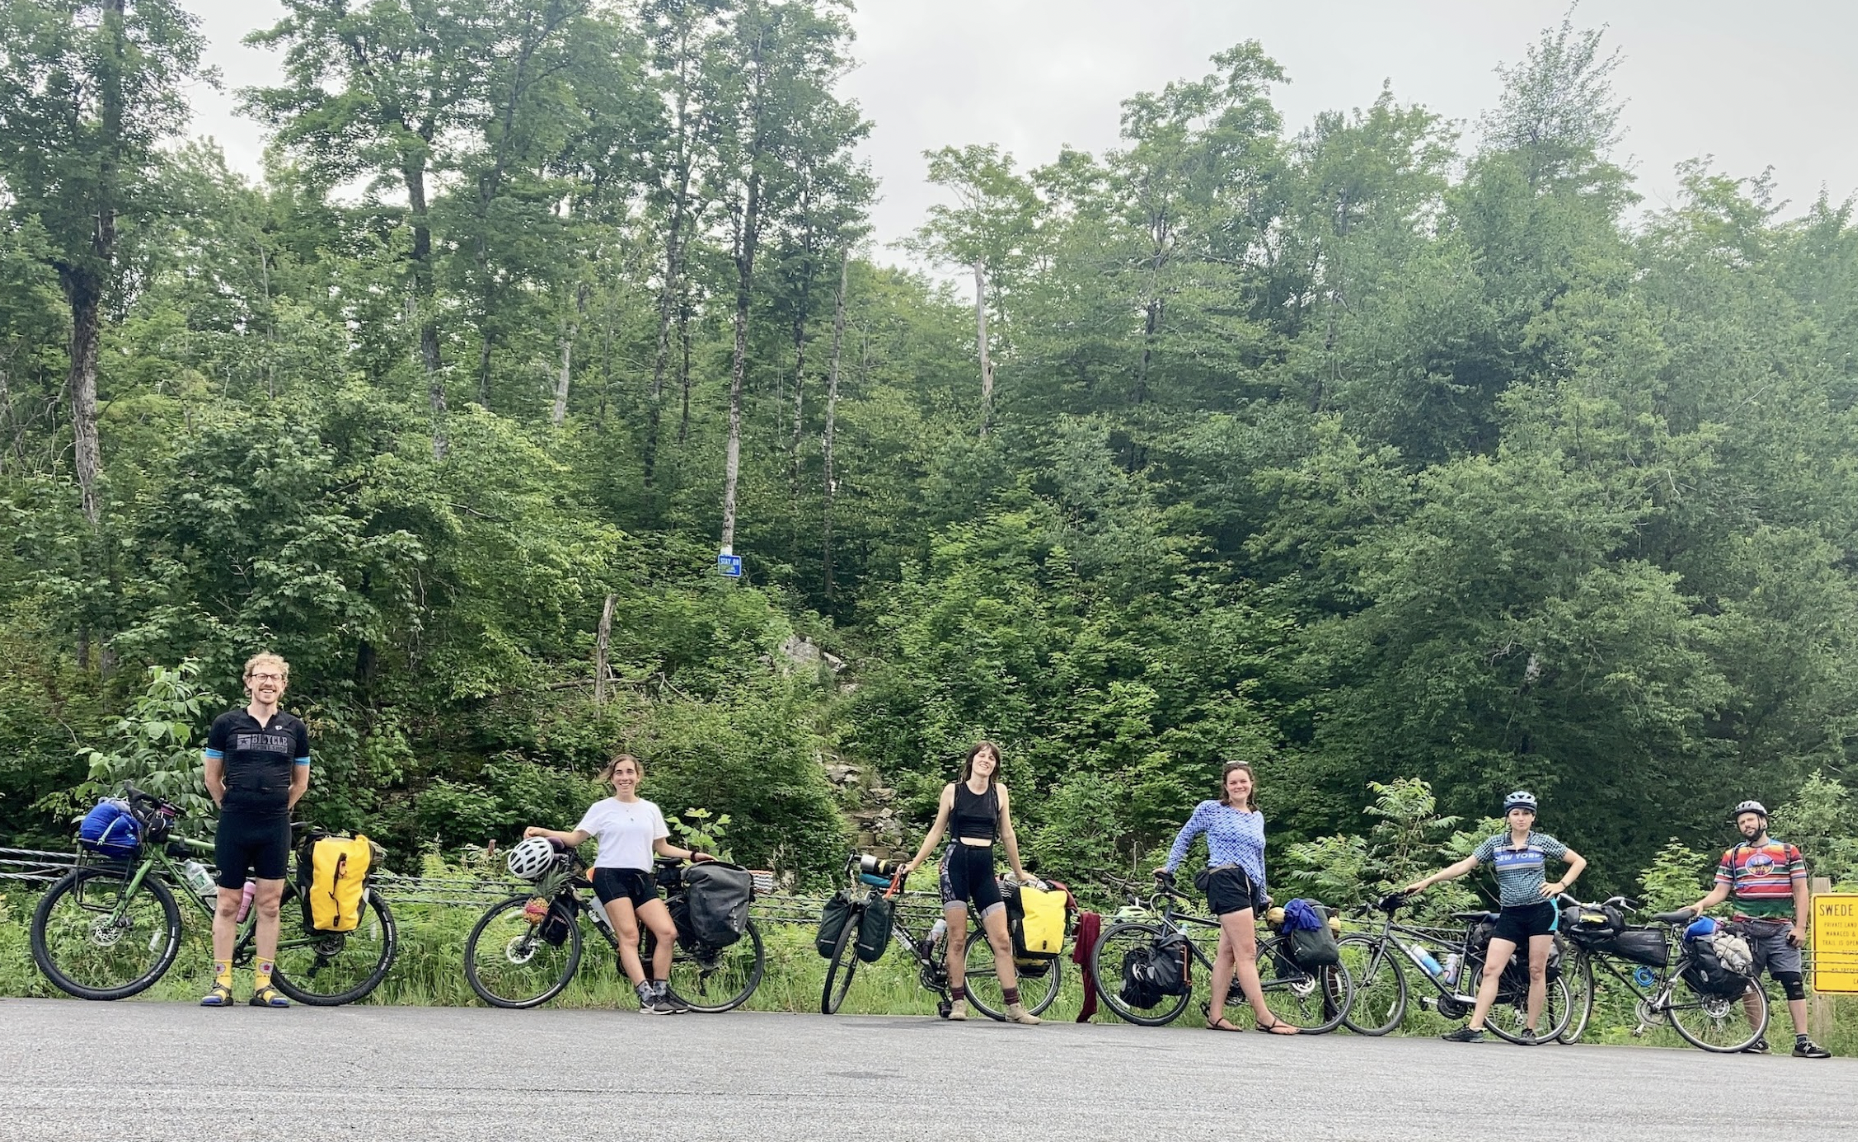 cyclists on a paved road with bikes